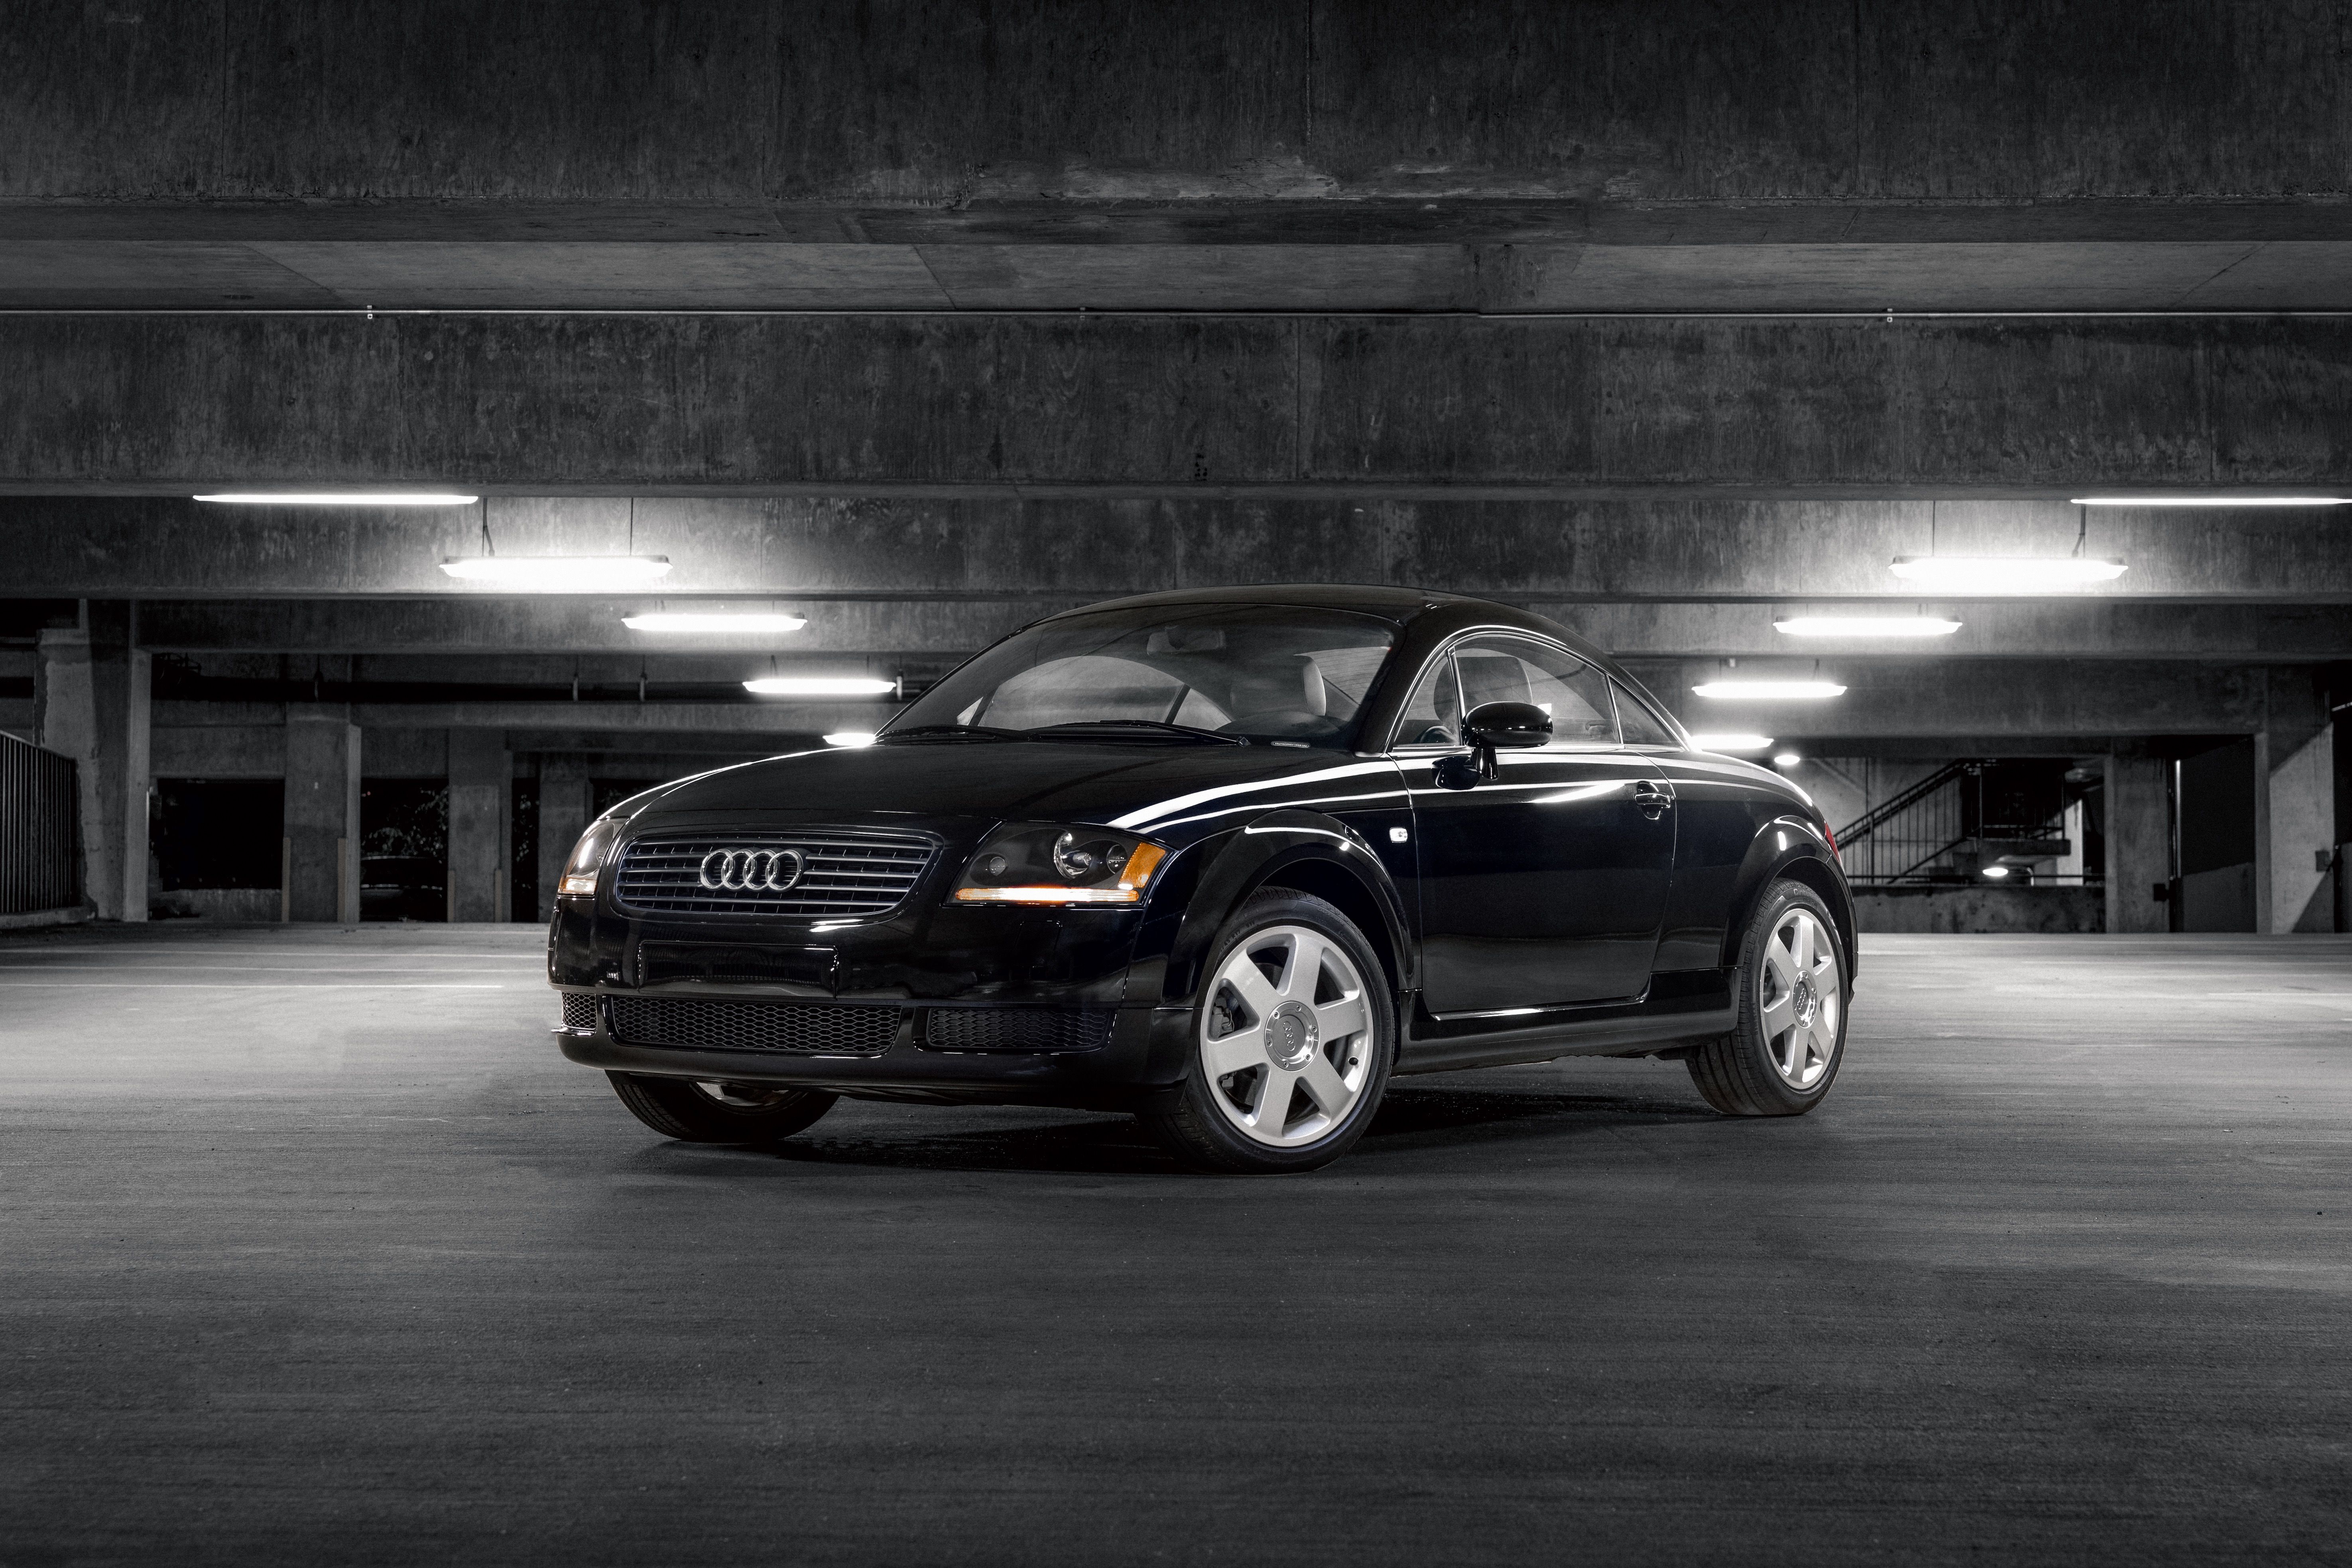 The Audi TT Is Dead. This Is The Last Car Built